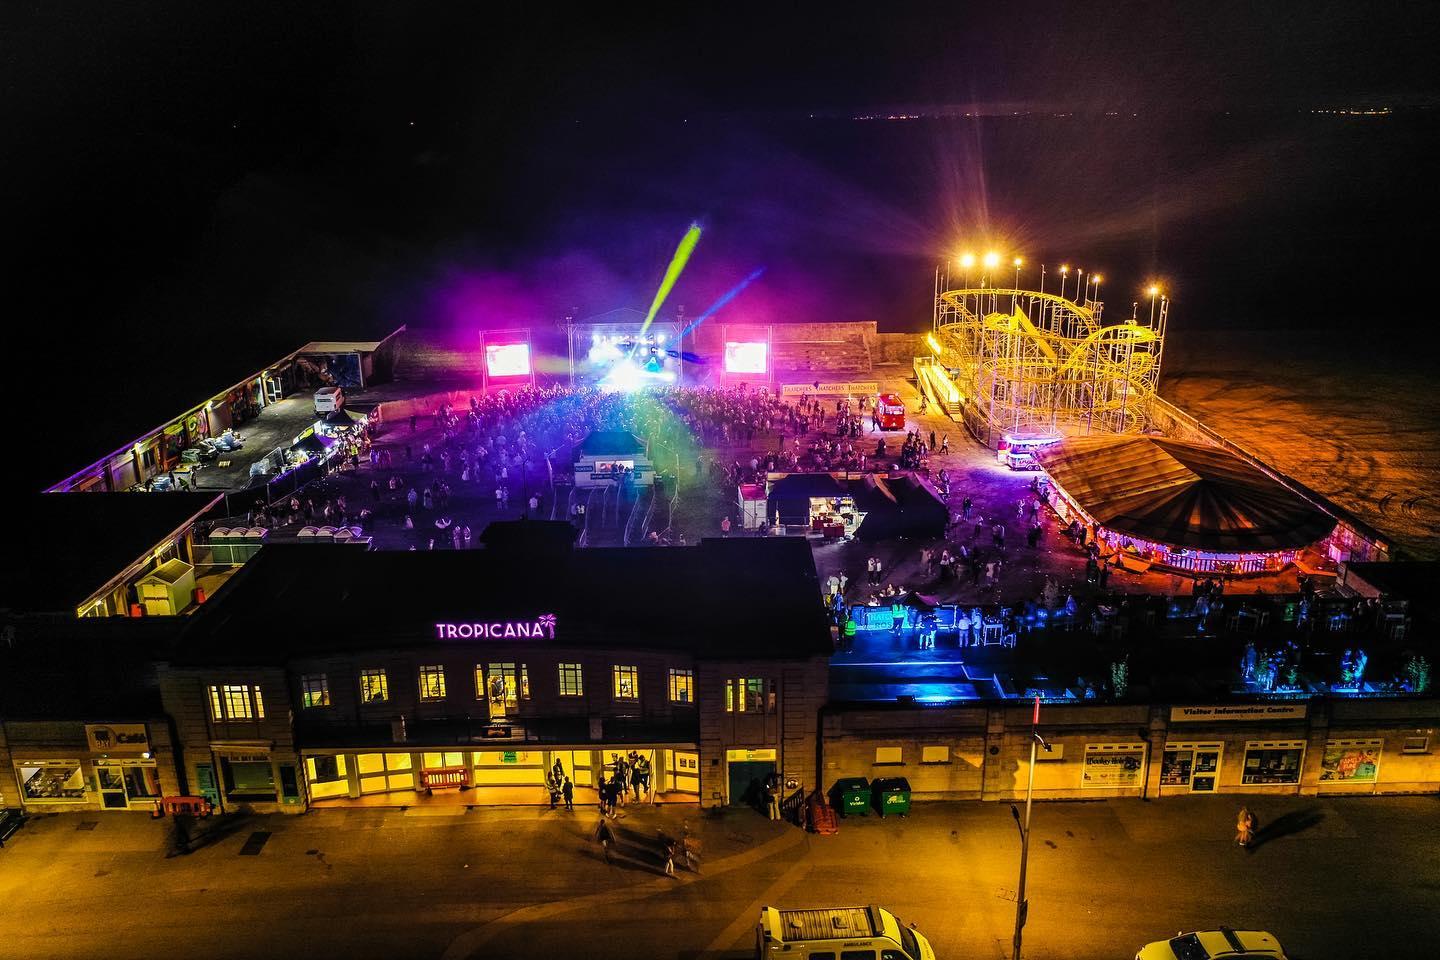 A overhead shot at night of the Tropicana as it was when Banky's Dismaland was here in 2015. There are multi-coloured bright lights everywhere, and people lined up outside the front of the venue.